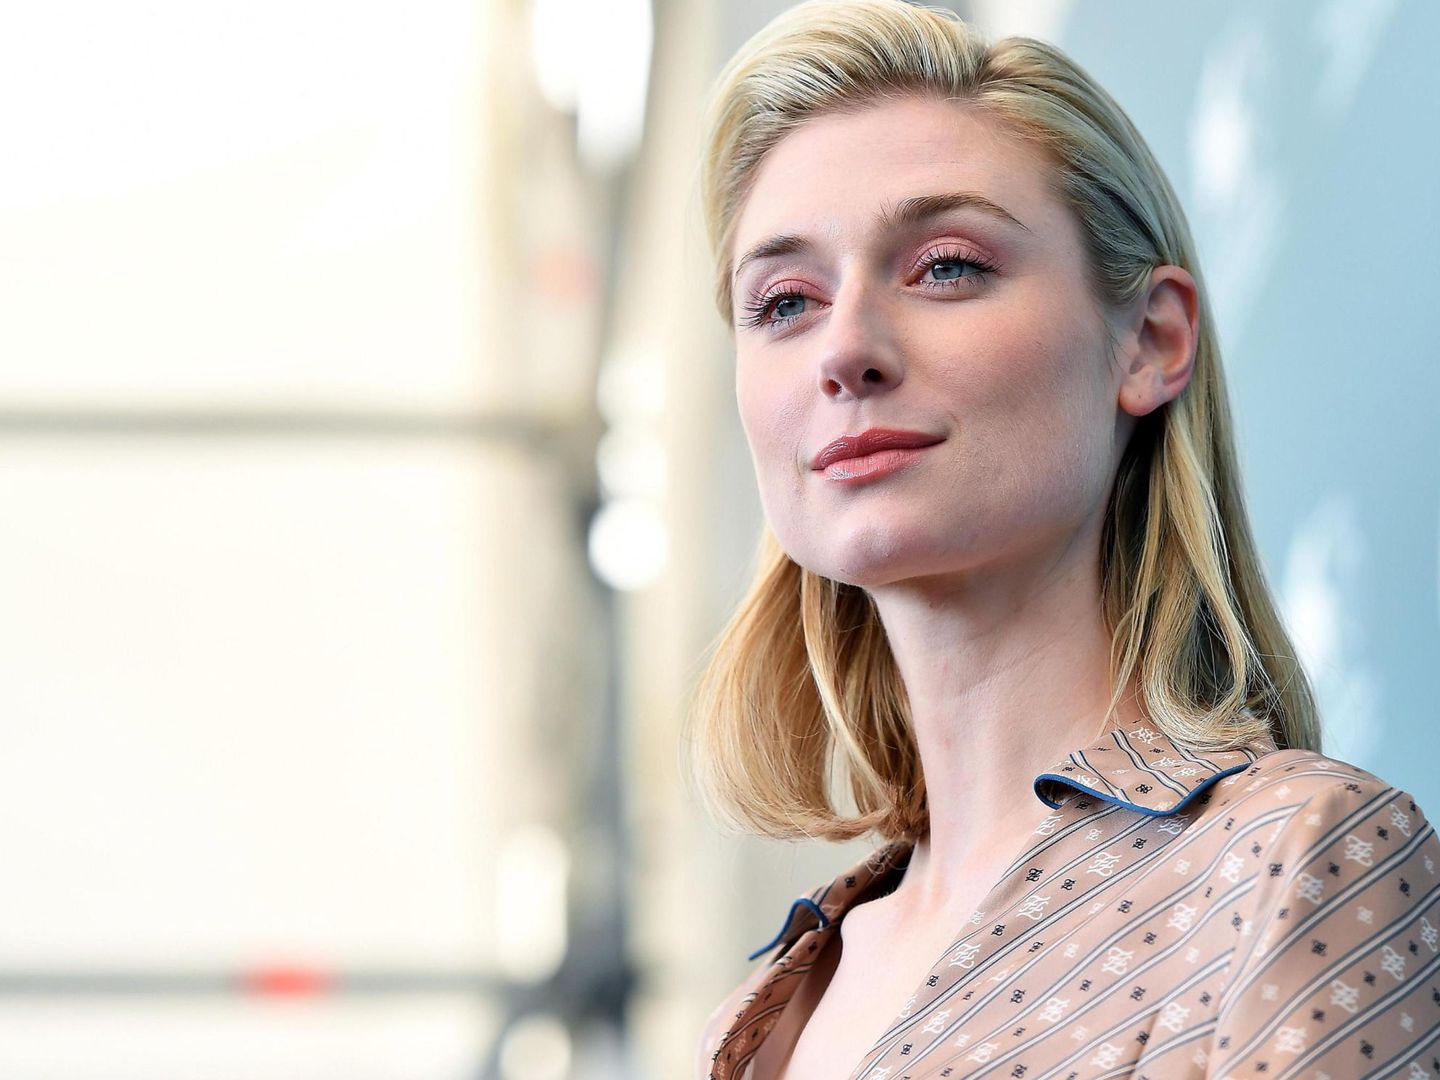 Venice (Italy), 07 09 2019.- Australian actress Elizabeth Debicki poses at a photocall for 'The Burnt Orange Heresy' during the 76th annual Venice International Film Festival, in Venice, Italy, 07 September 2019. The movie is presented out of competition at the festival running from 28 August to 07 September. (Cine, Italia, Niza, Venecia) EFE EPA ETTORE FERRARI